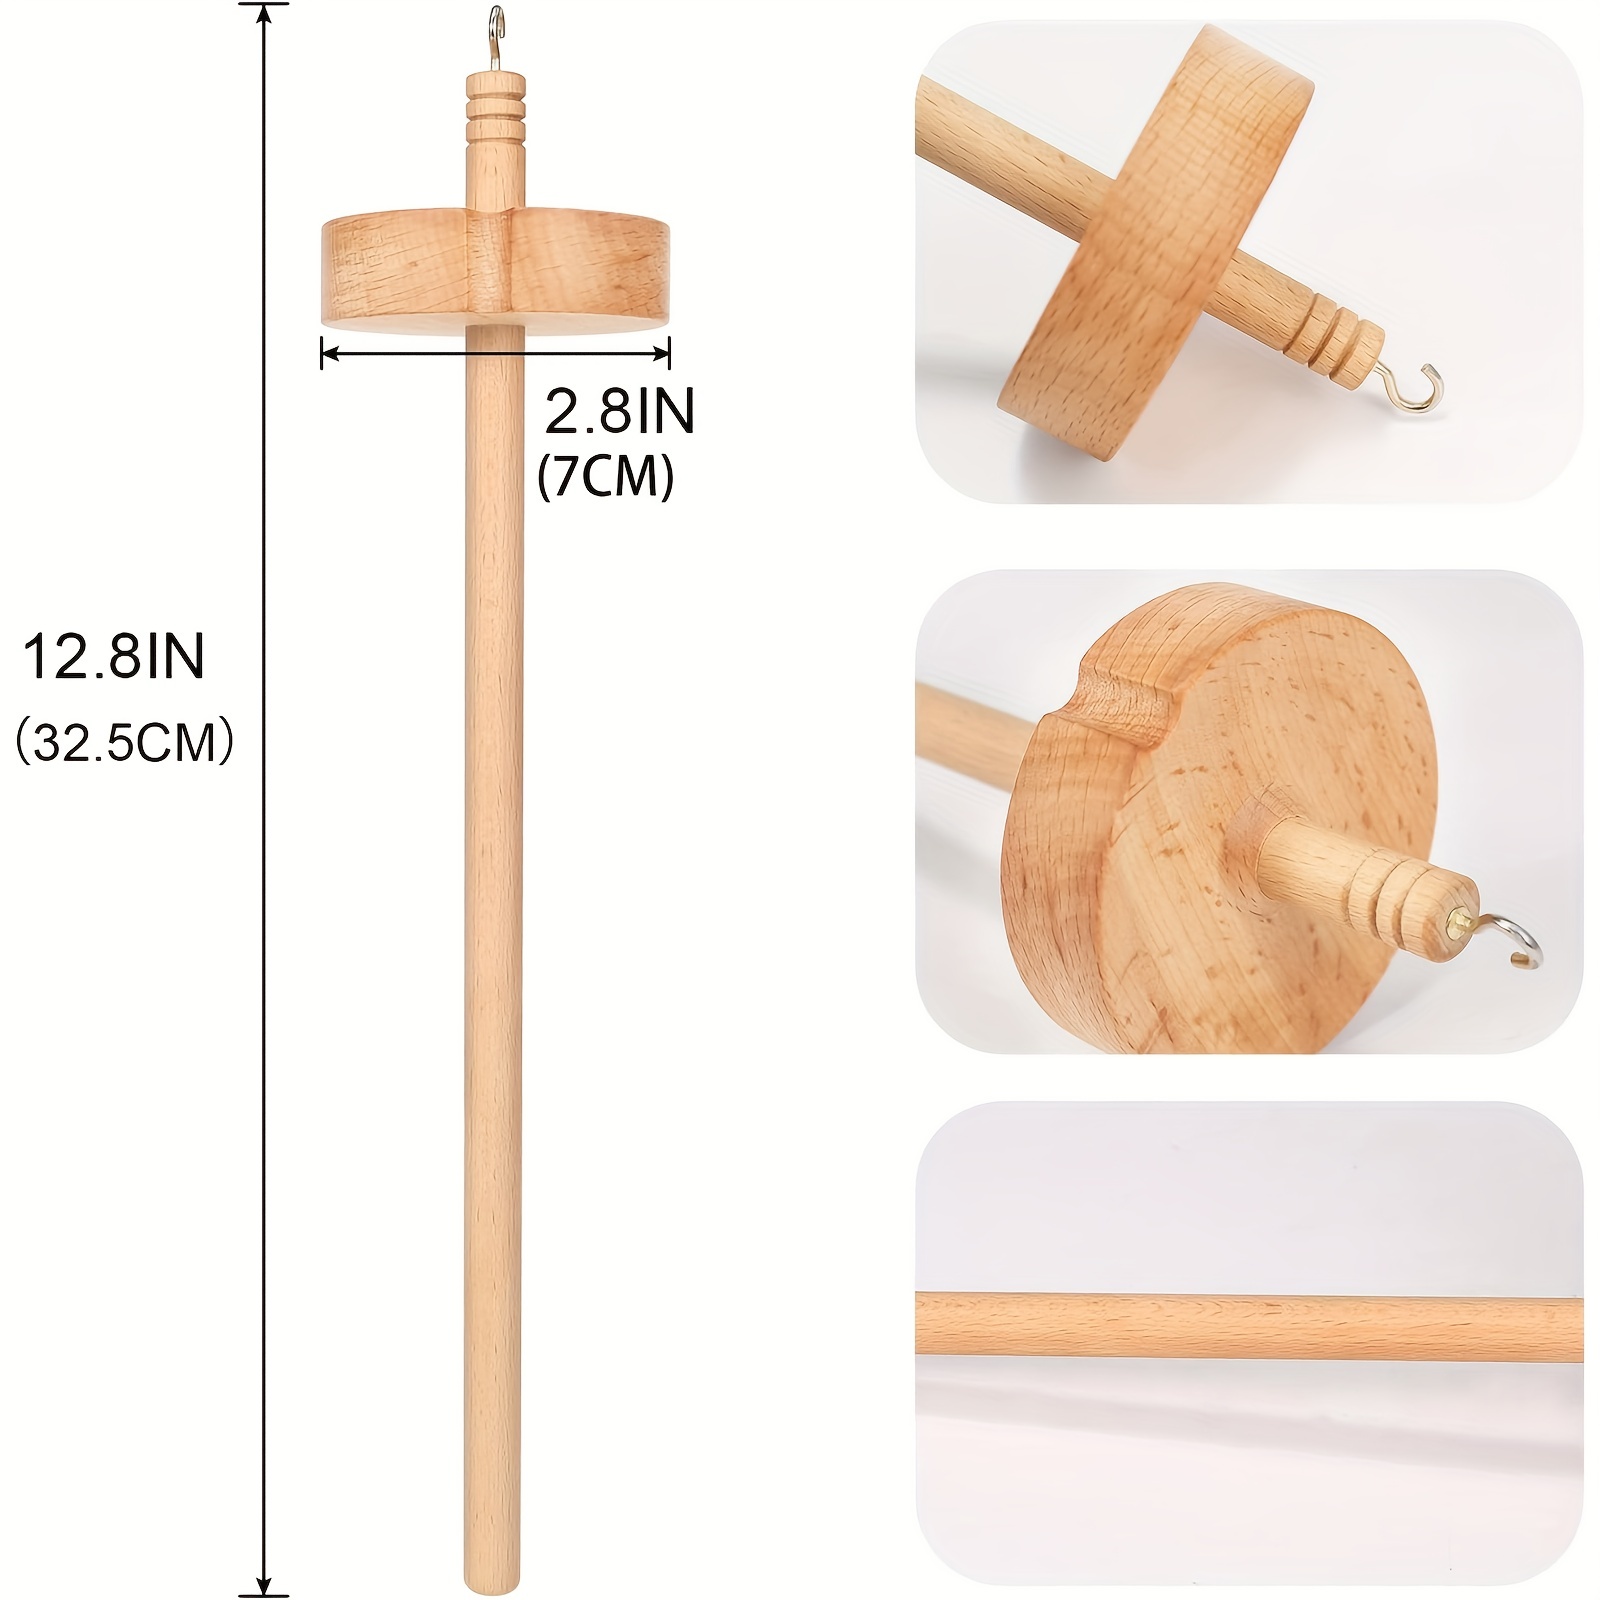 ckepdyeh 2Pcs Drop Spindle for Spinning Wool Yarn Spin Top Whorl Drop  Spindle Hand Carved Wooden Tool for Beginners 